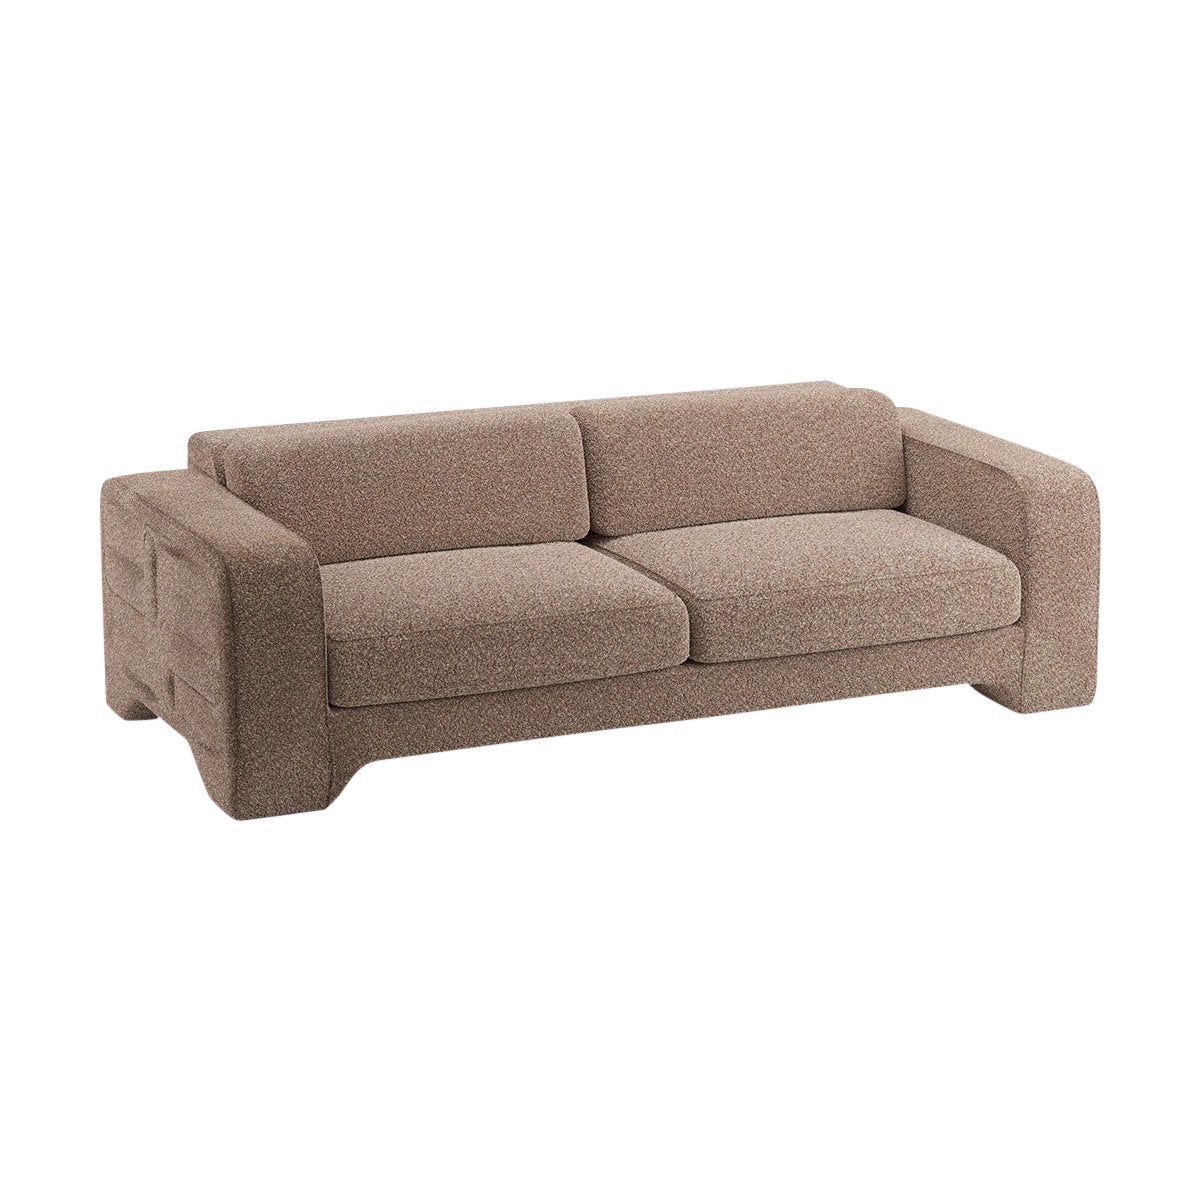 Popus Editions Giovanna 2.5 Seater Sofa in Ciotello Athena Loop Yarn Upholstery For Sale